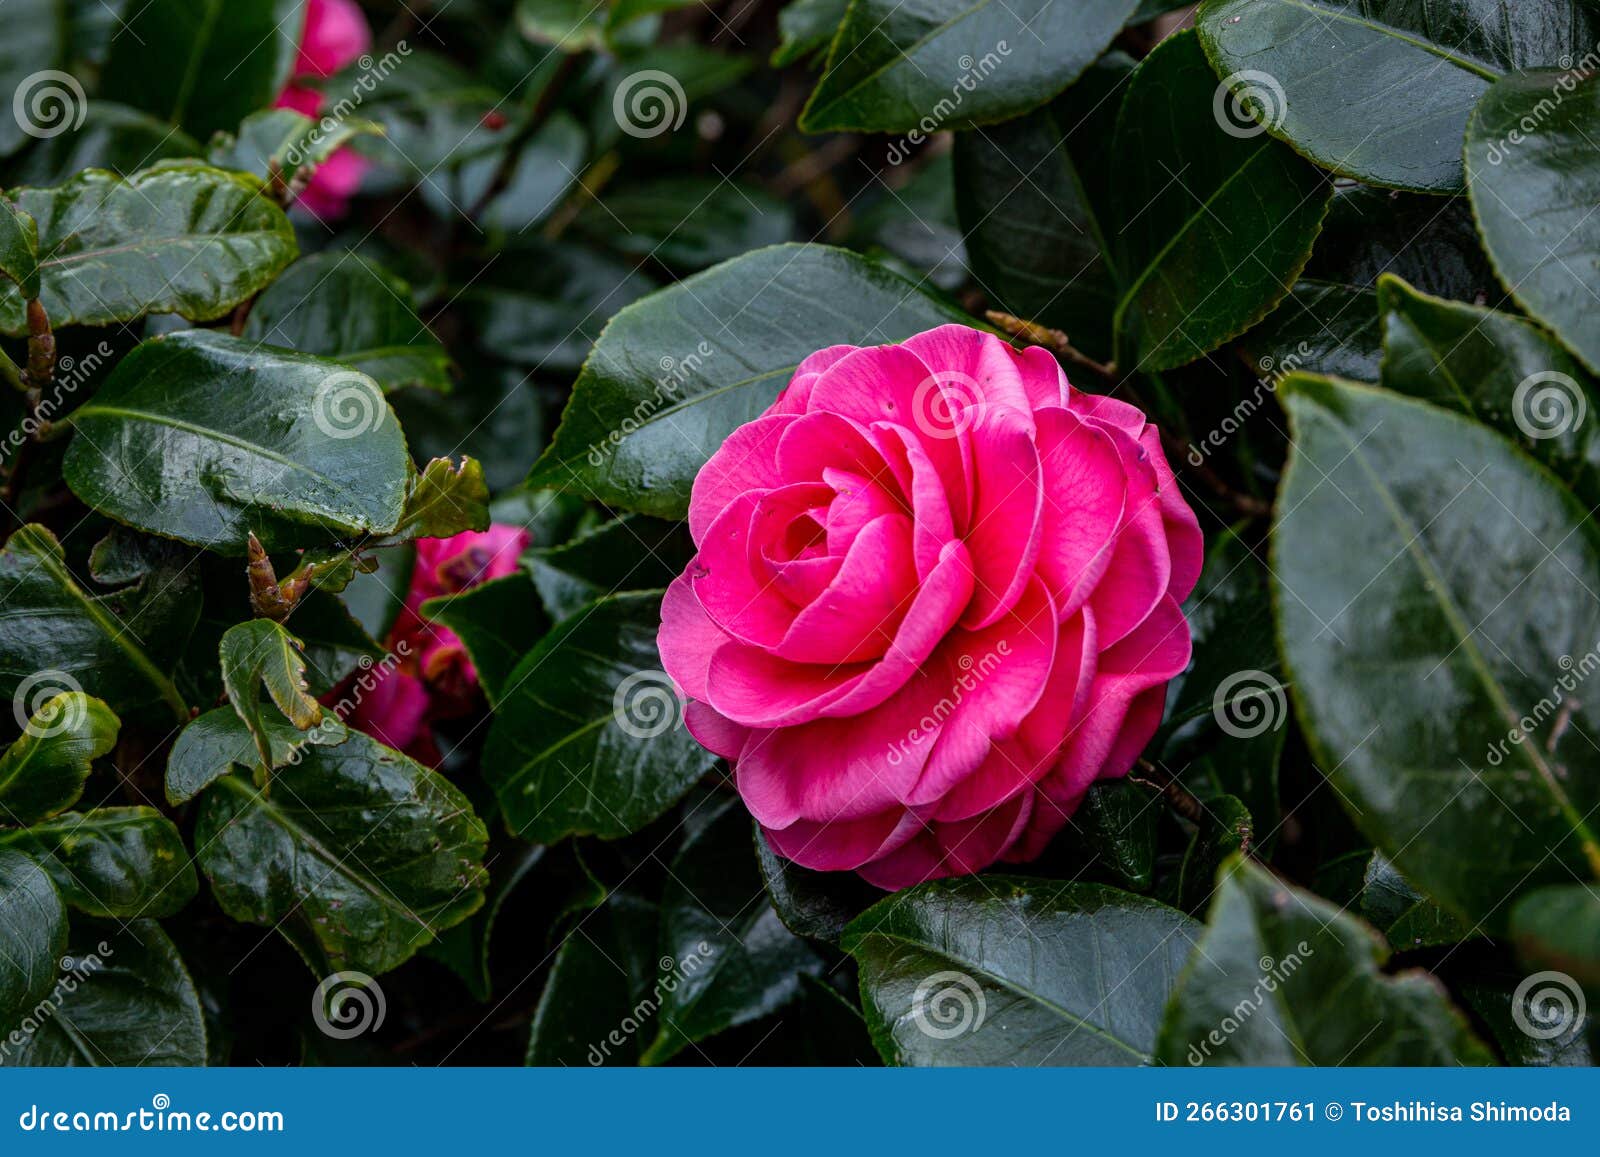 Neat and Beautiful Izu Camellia Flower in Japan. Stock Image - Image of ...